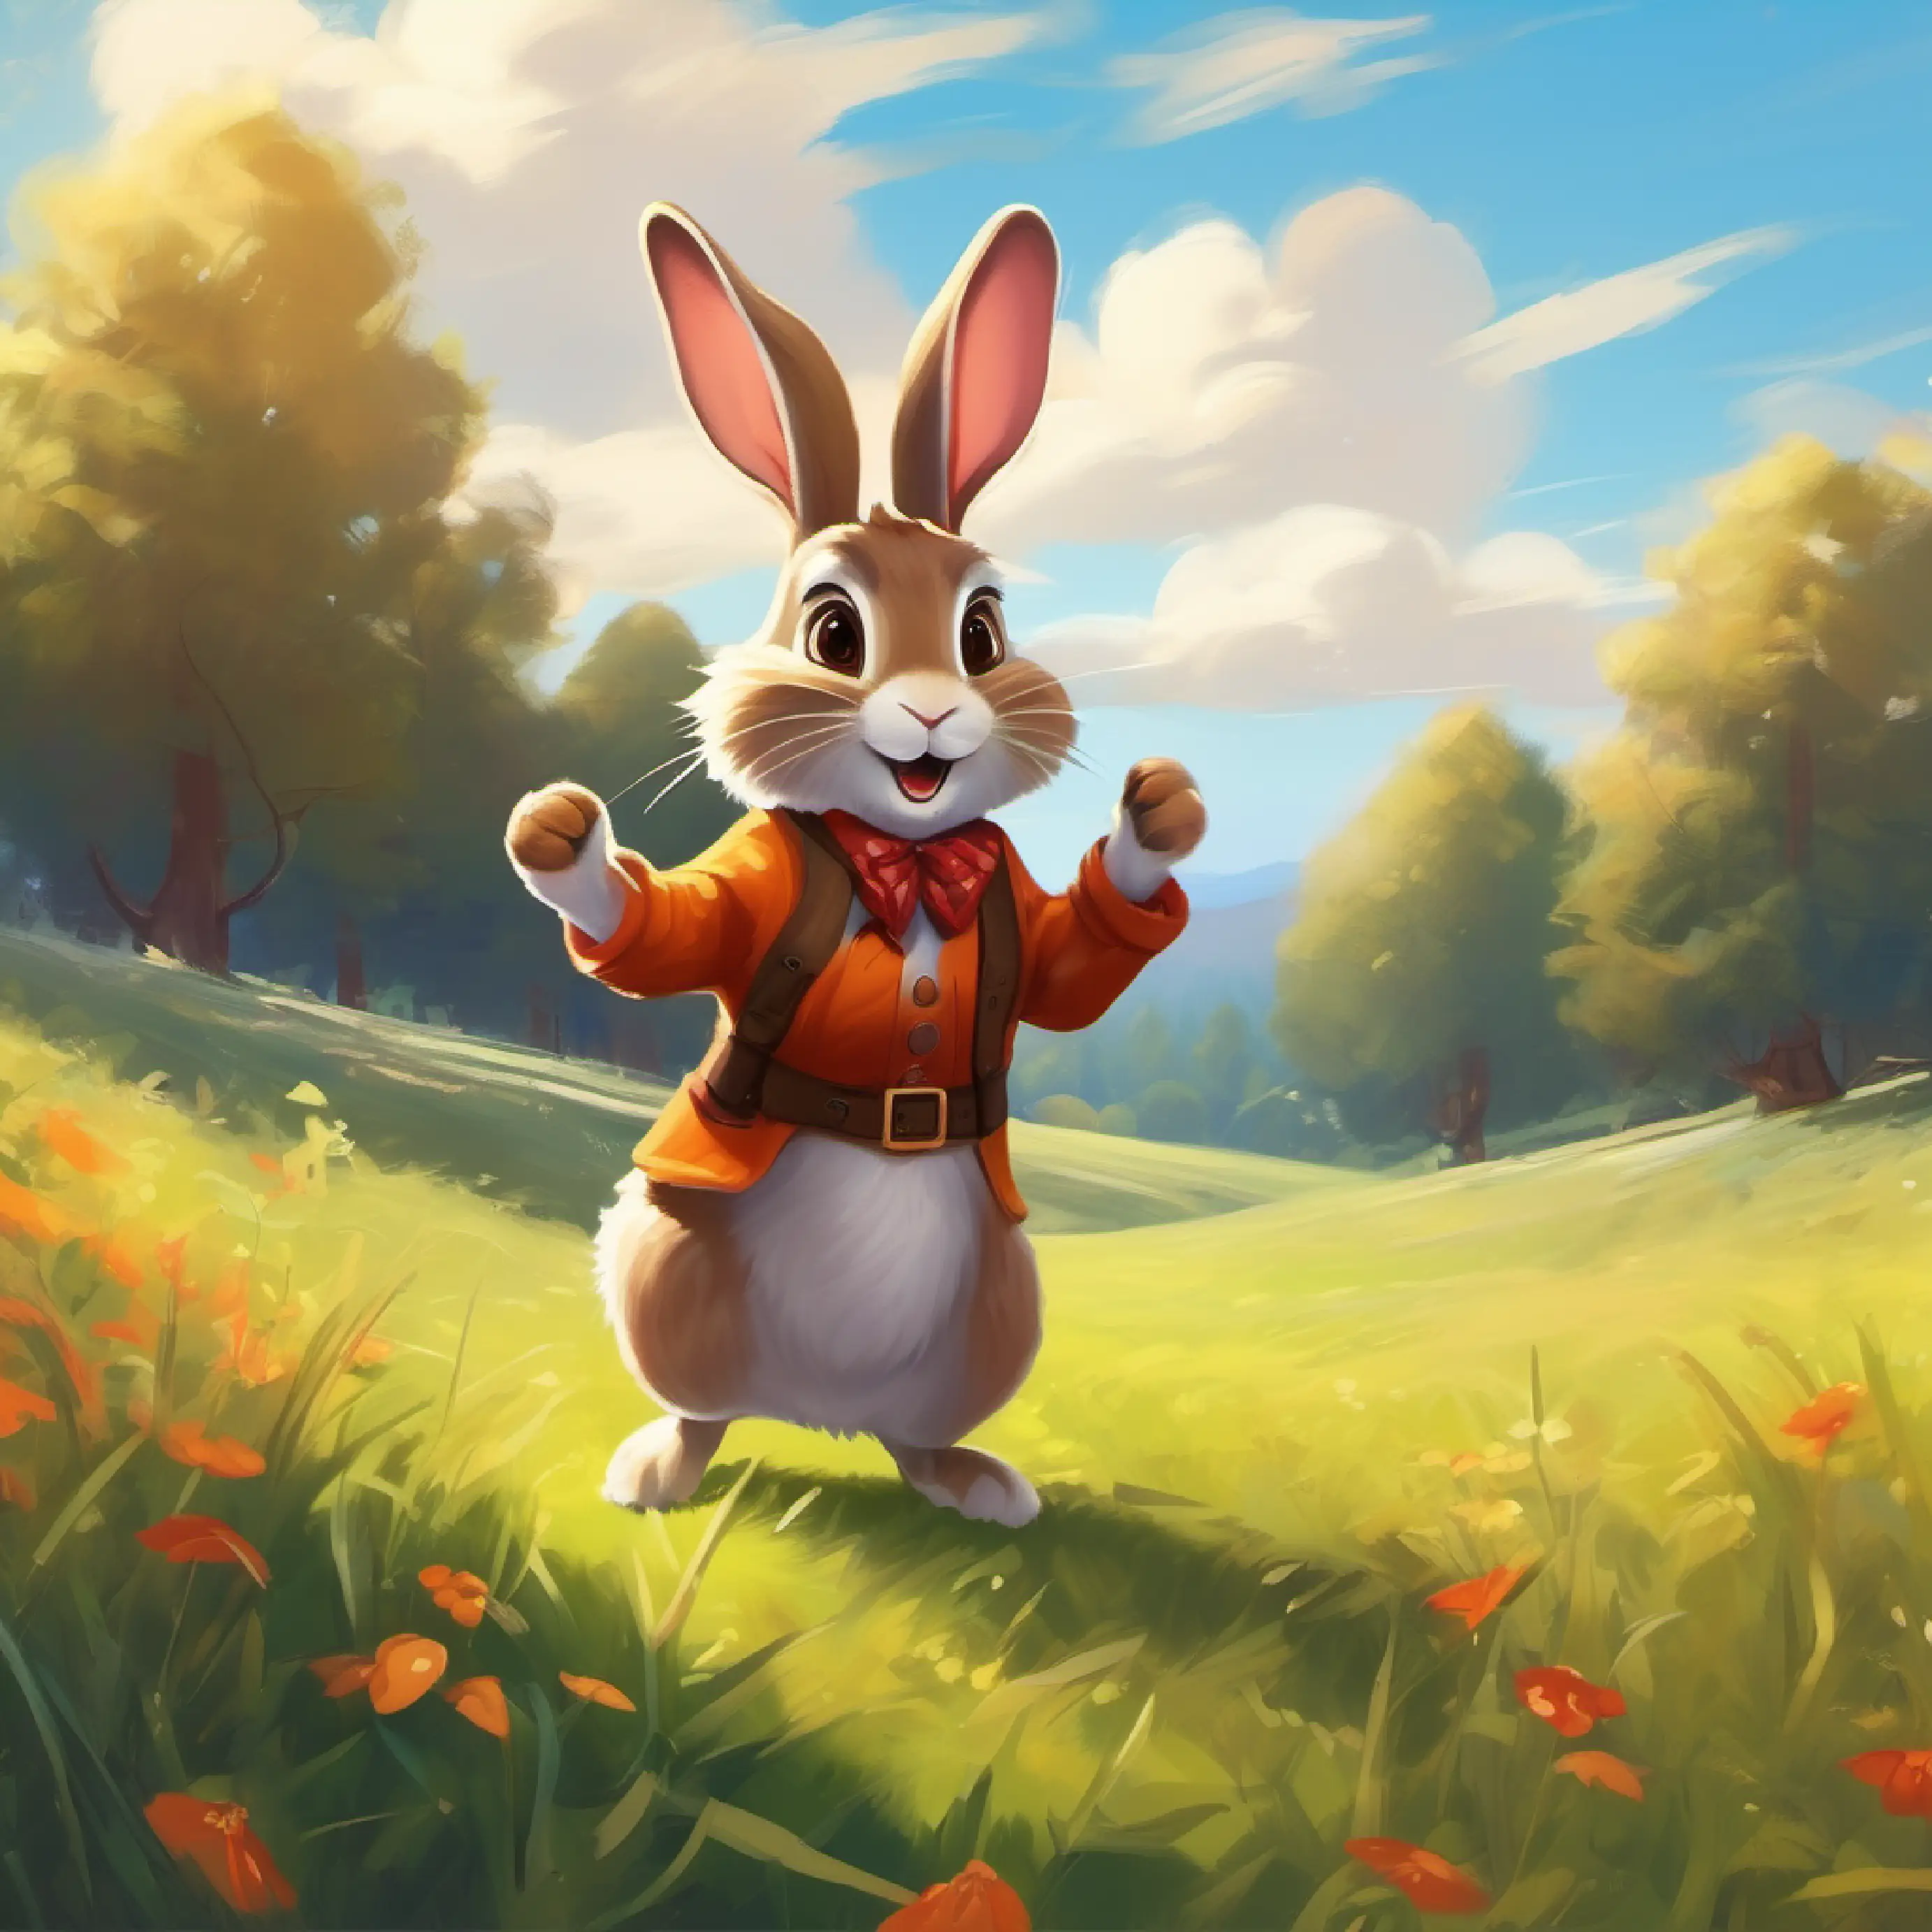 Introduces A brown rabbit with white paws and bright, trying to sing in a meadow, feeling nervous.